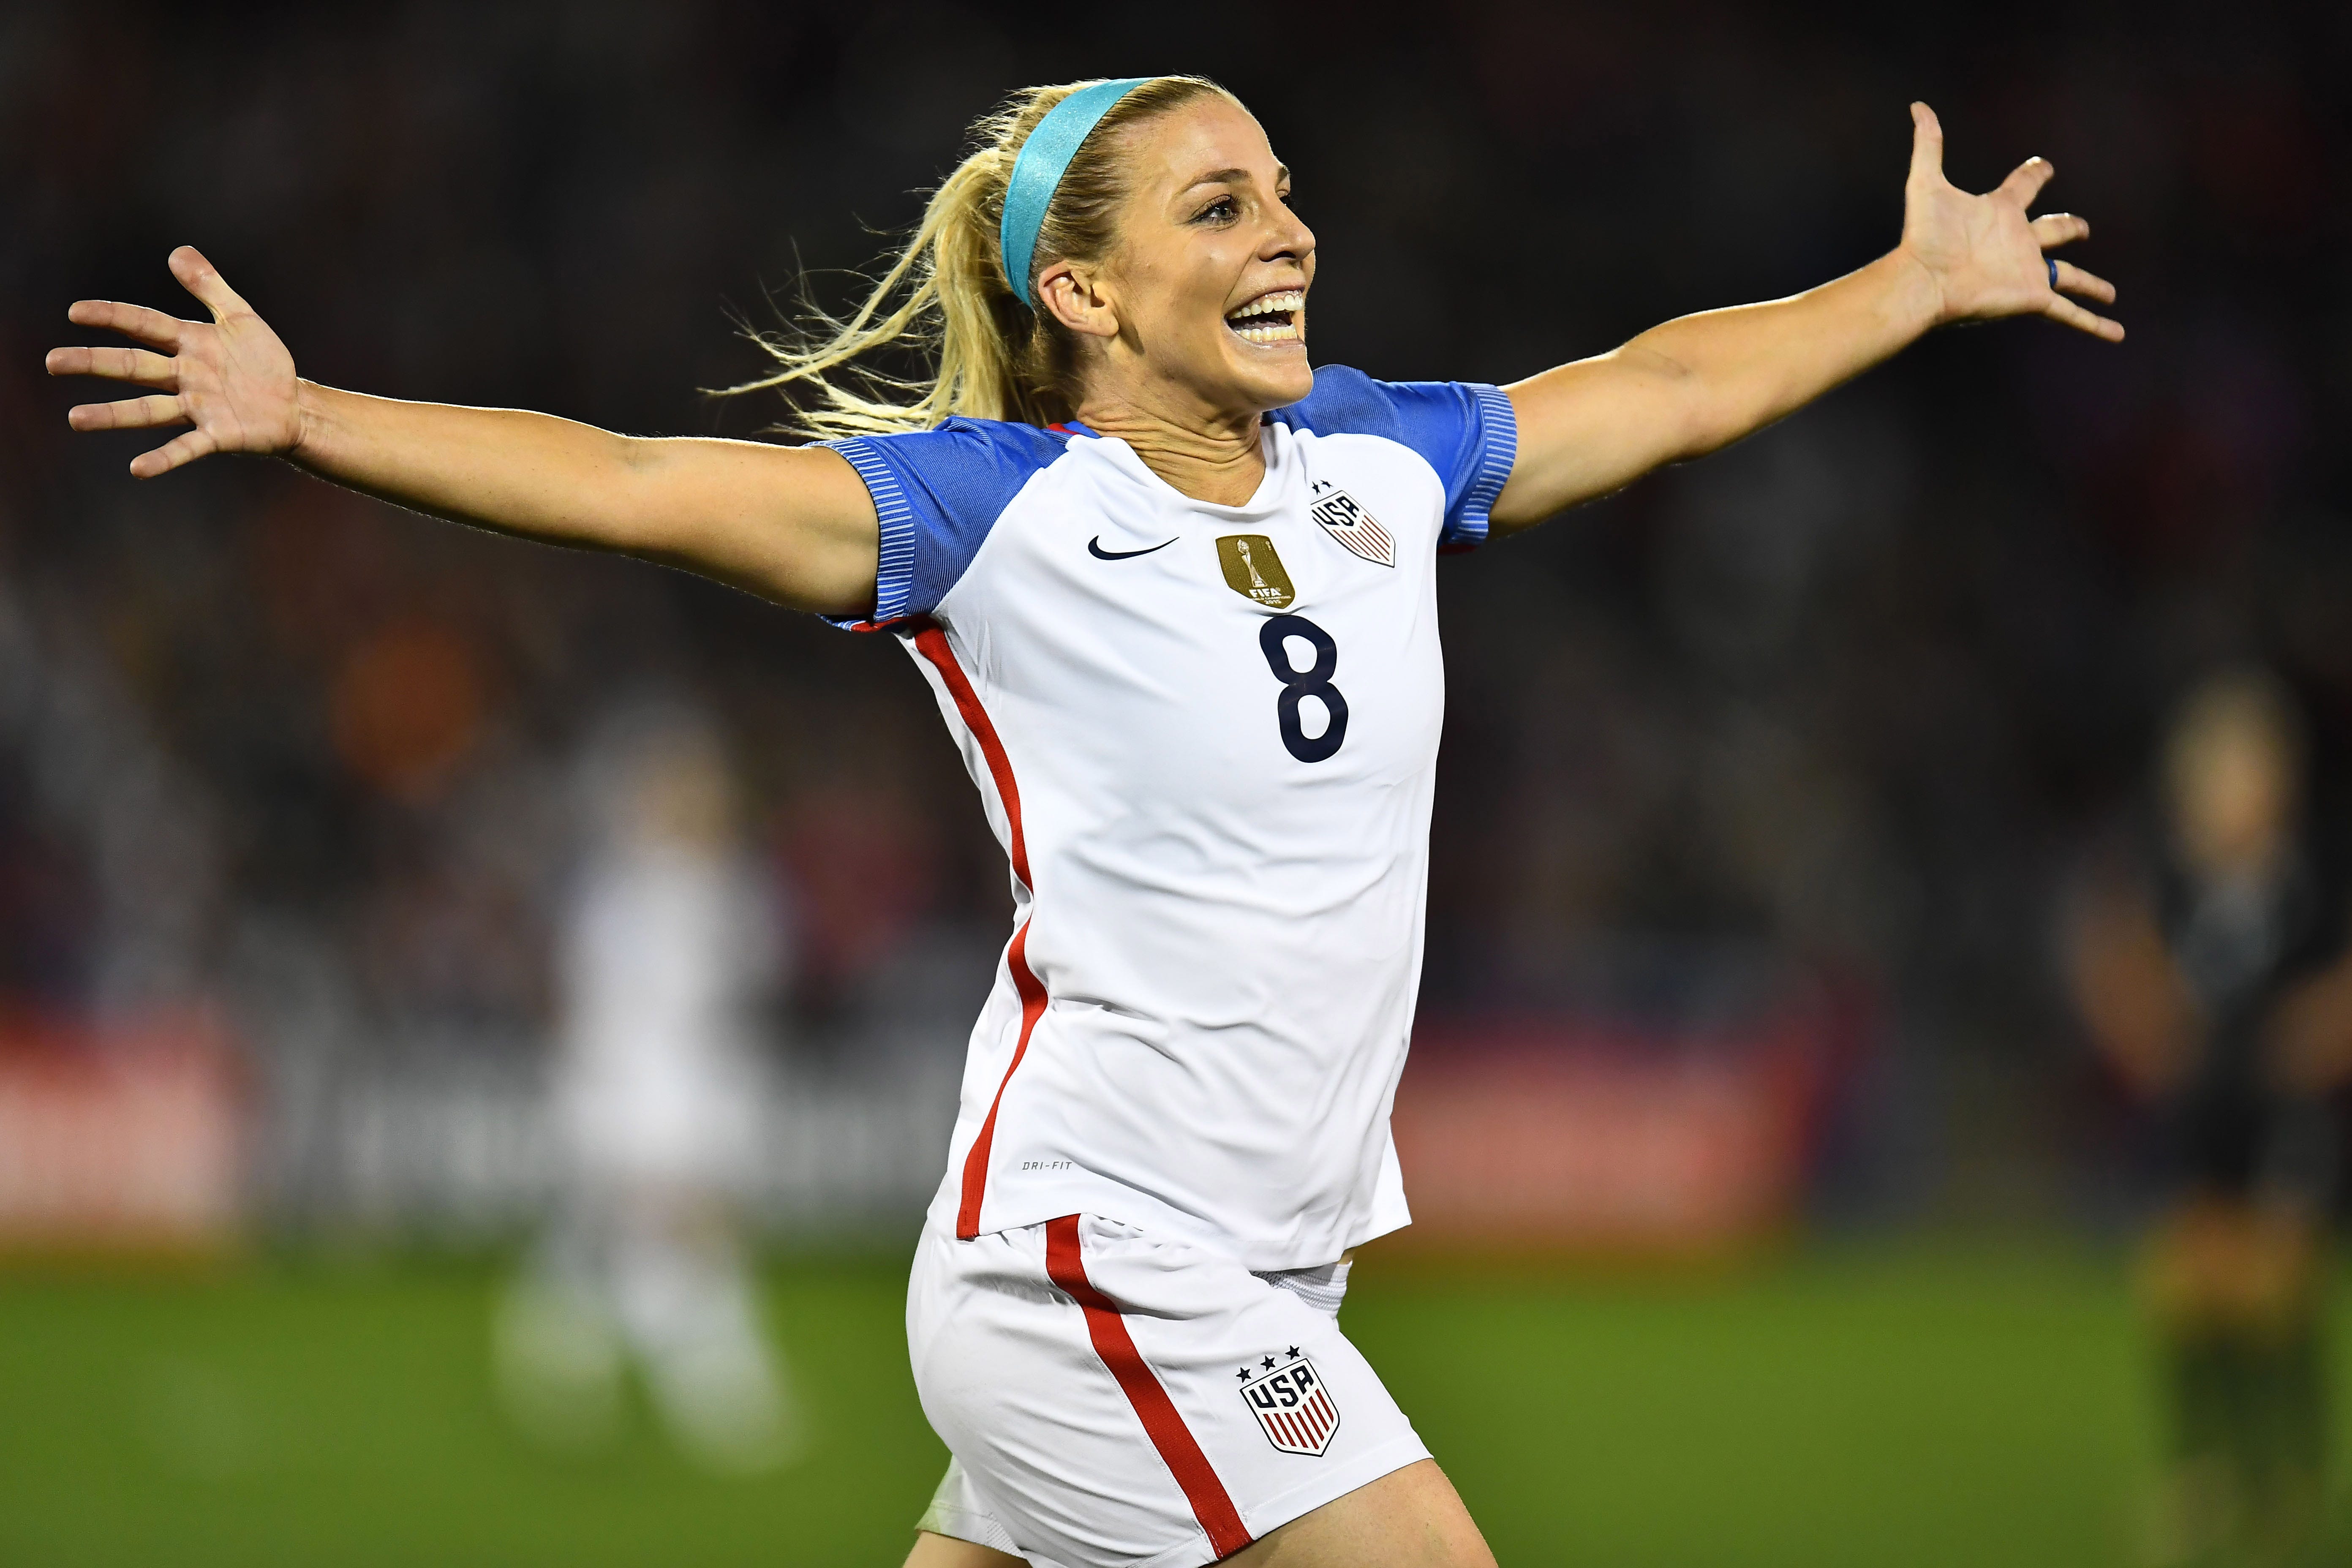 Women's World Cup: Julie Ertz's husband, Eagles tight end Zach to cheer her on